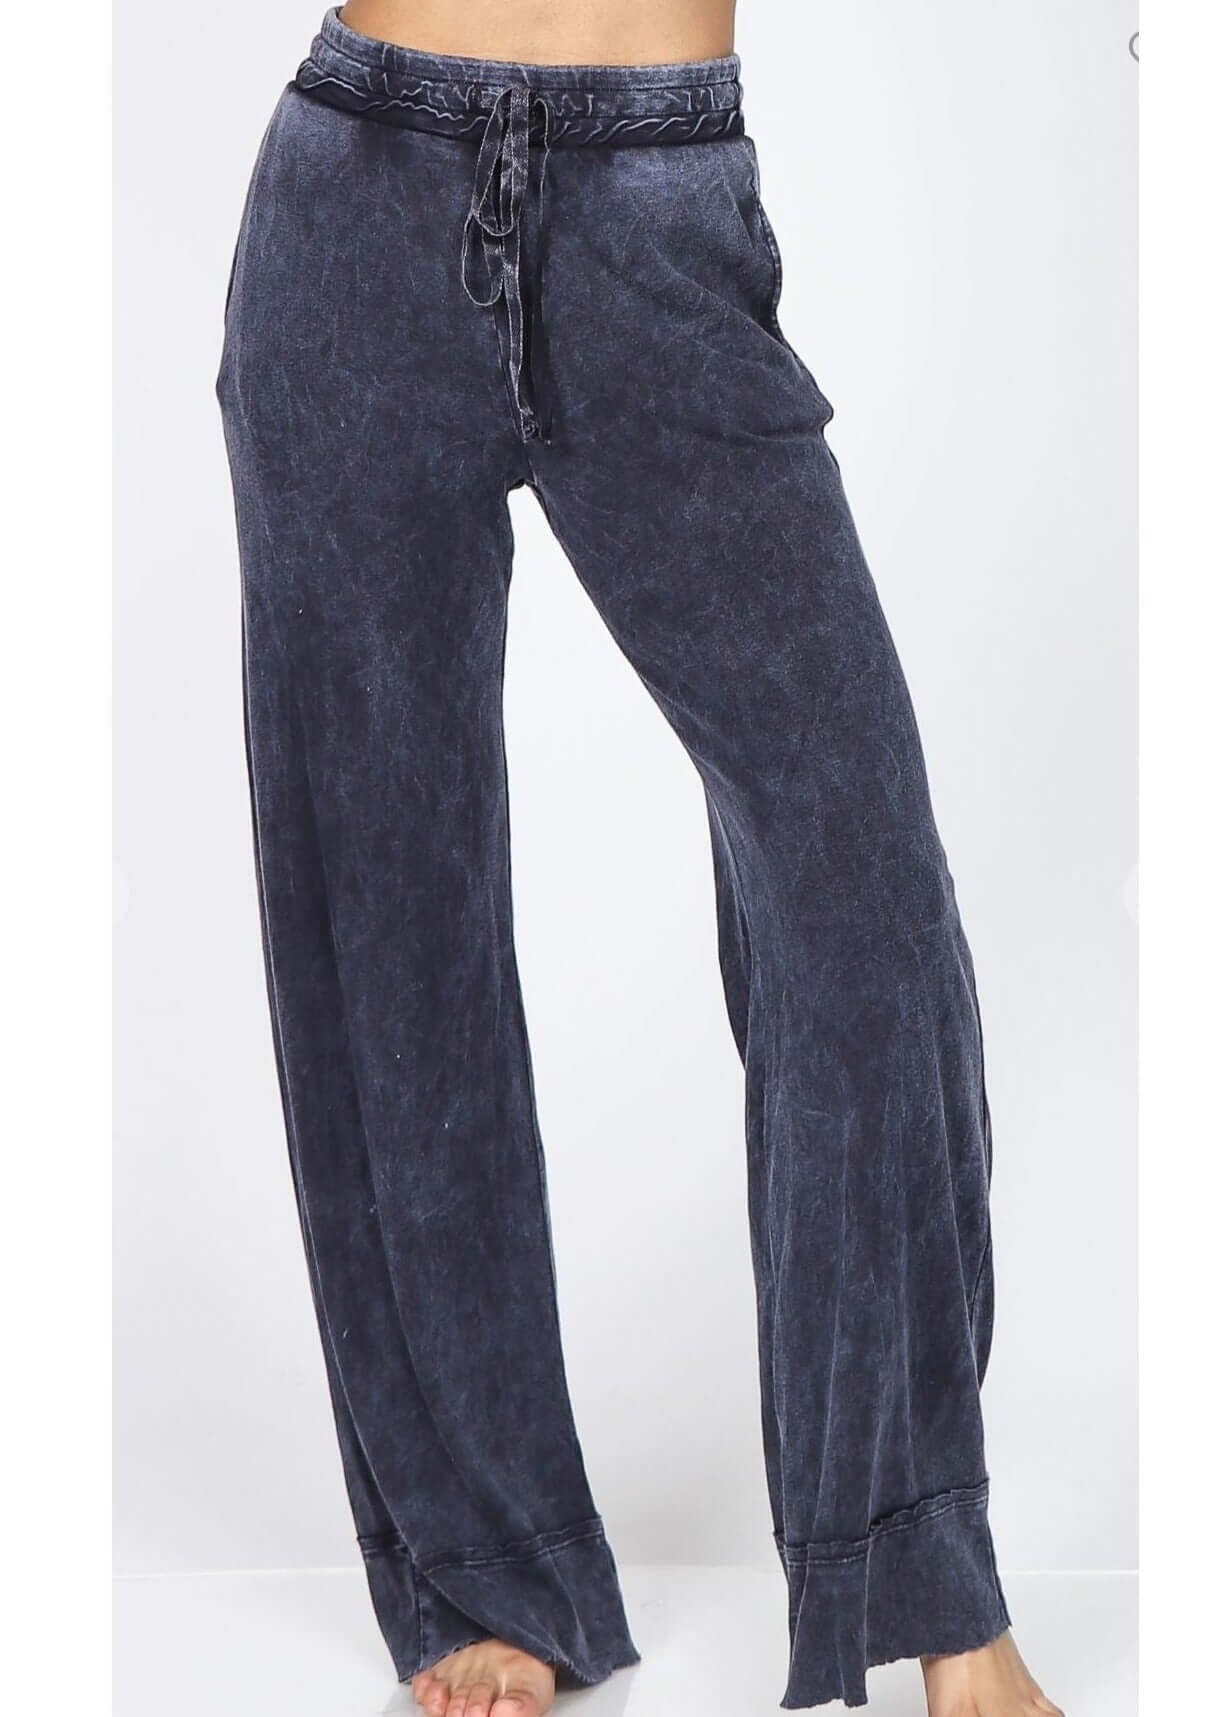 USA Made M. Rena Style# S4870  Ladies Mineral Washed Wide Leg Flare Bottom Raw Edge Pants | Cotton & Modal Soft Fabric | Clothing Made in America | Color: Dark Denim